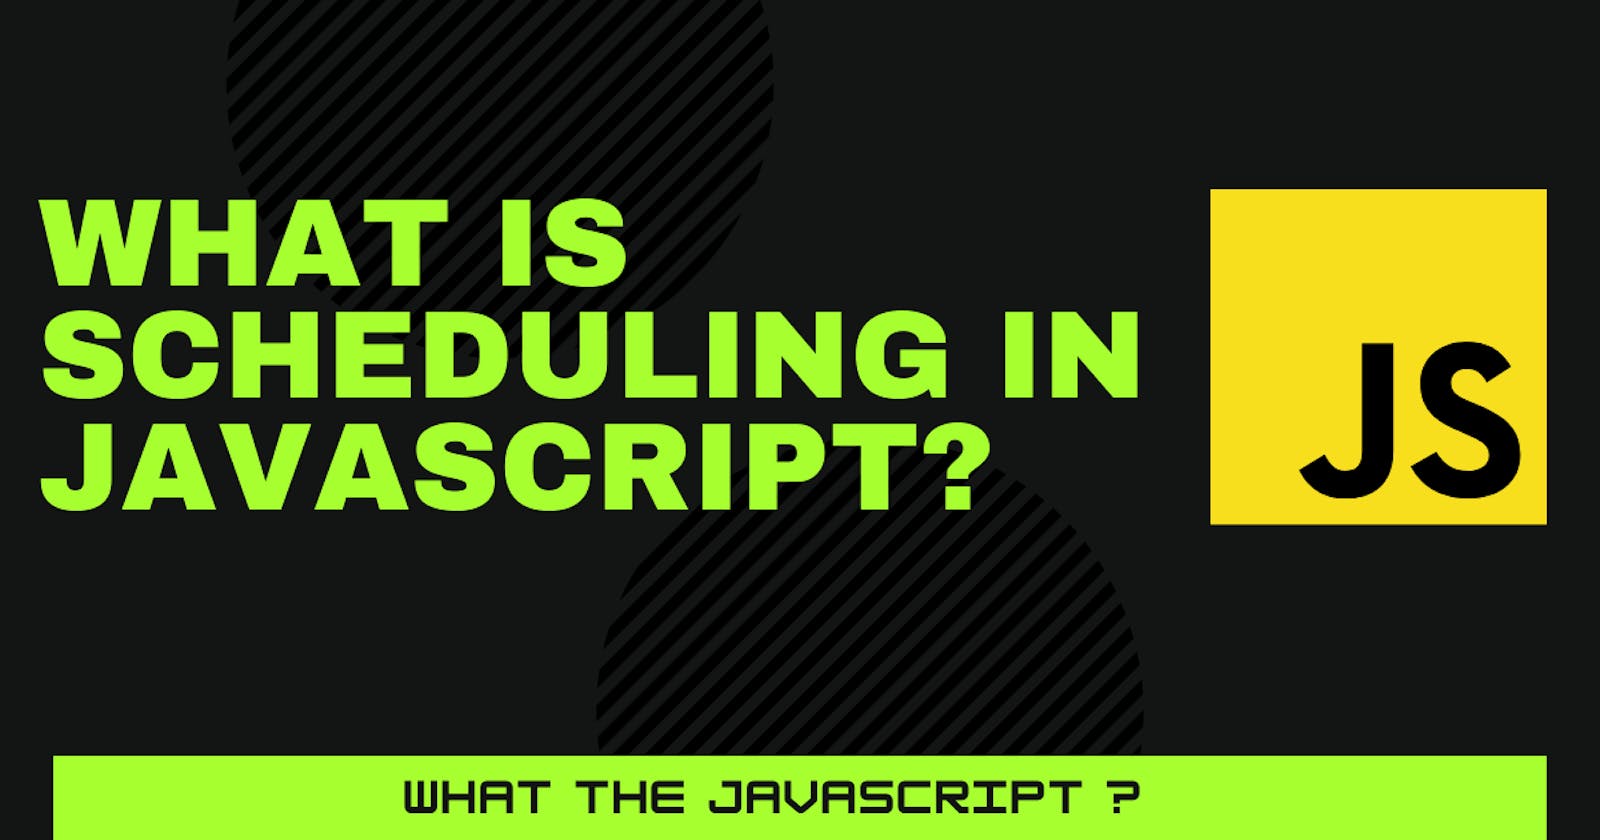 What is Scheduling in JavaScript?